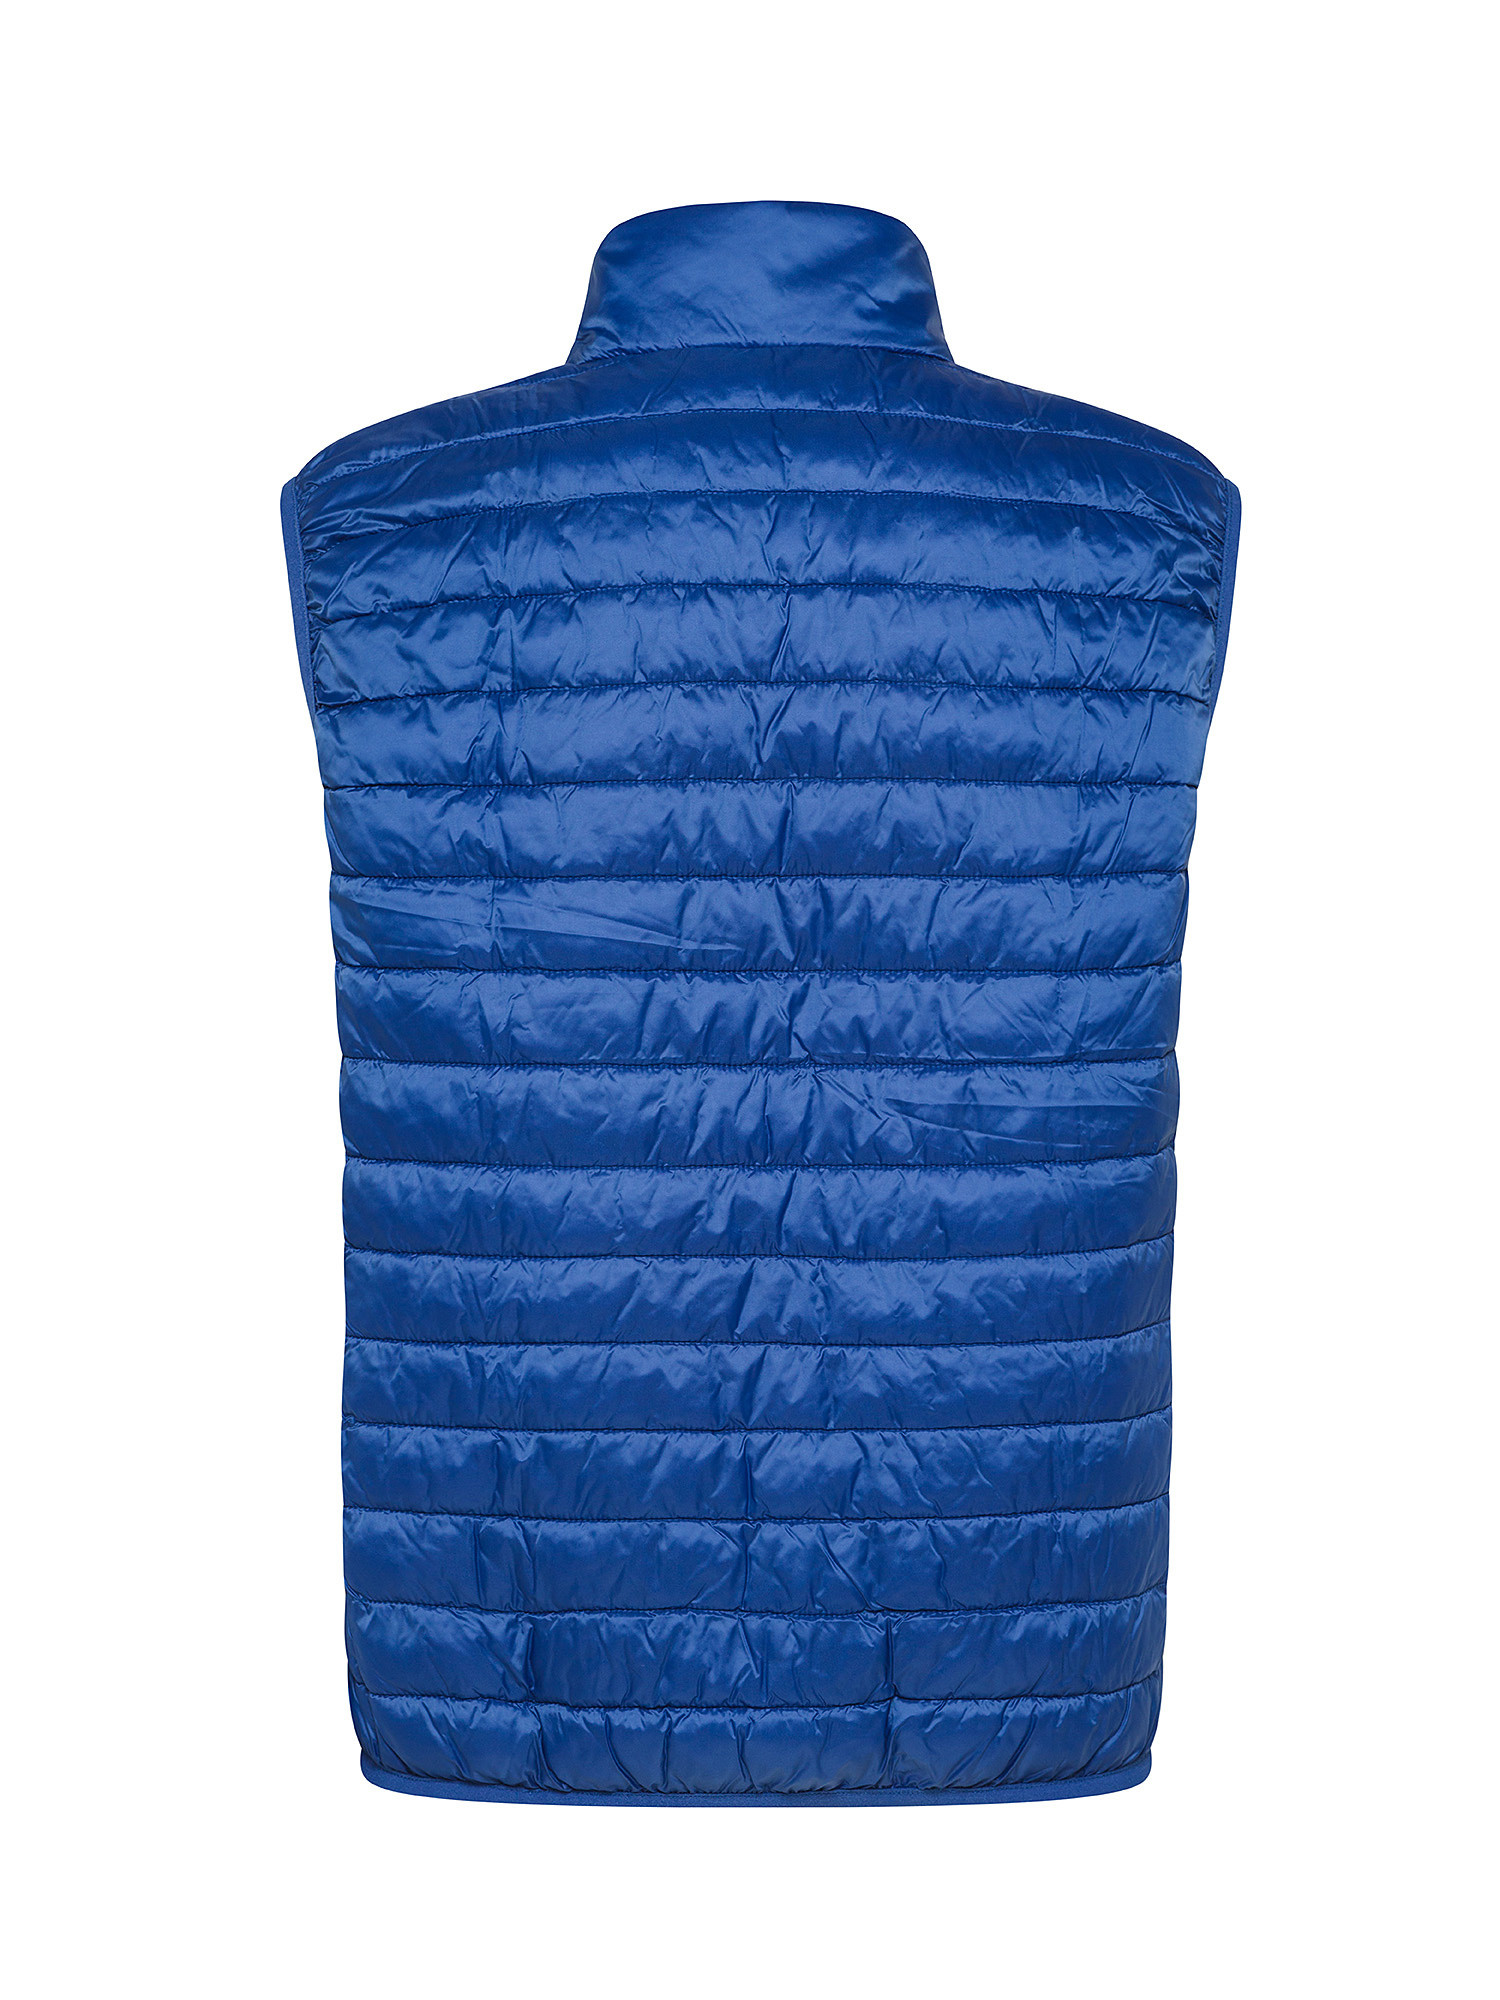 JCT - Quilted sleeveless down jacket, Blue Cornflower, large image number 1